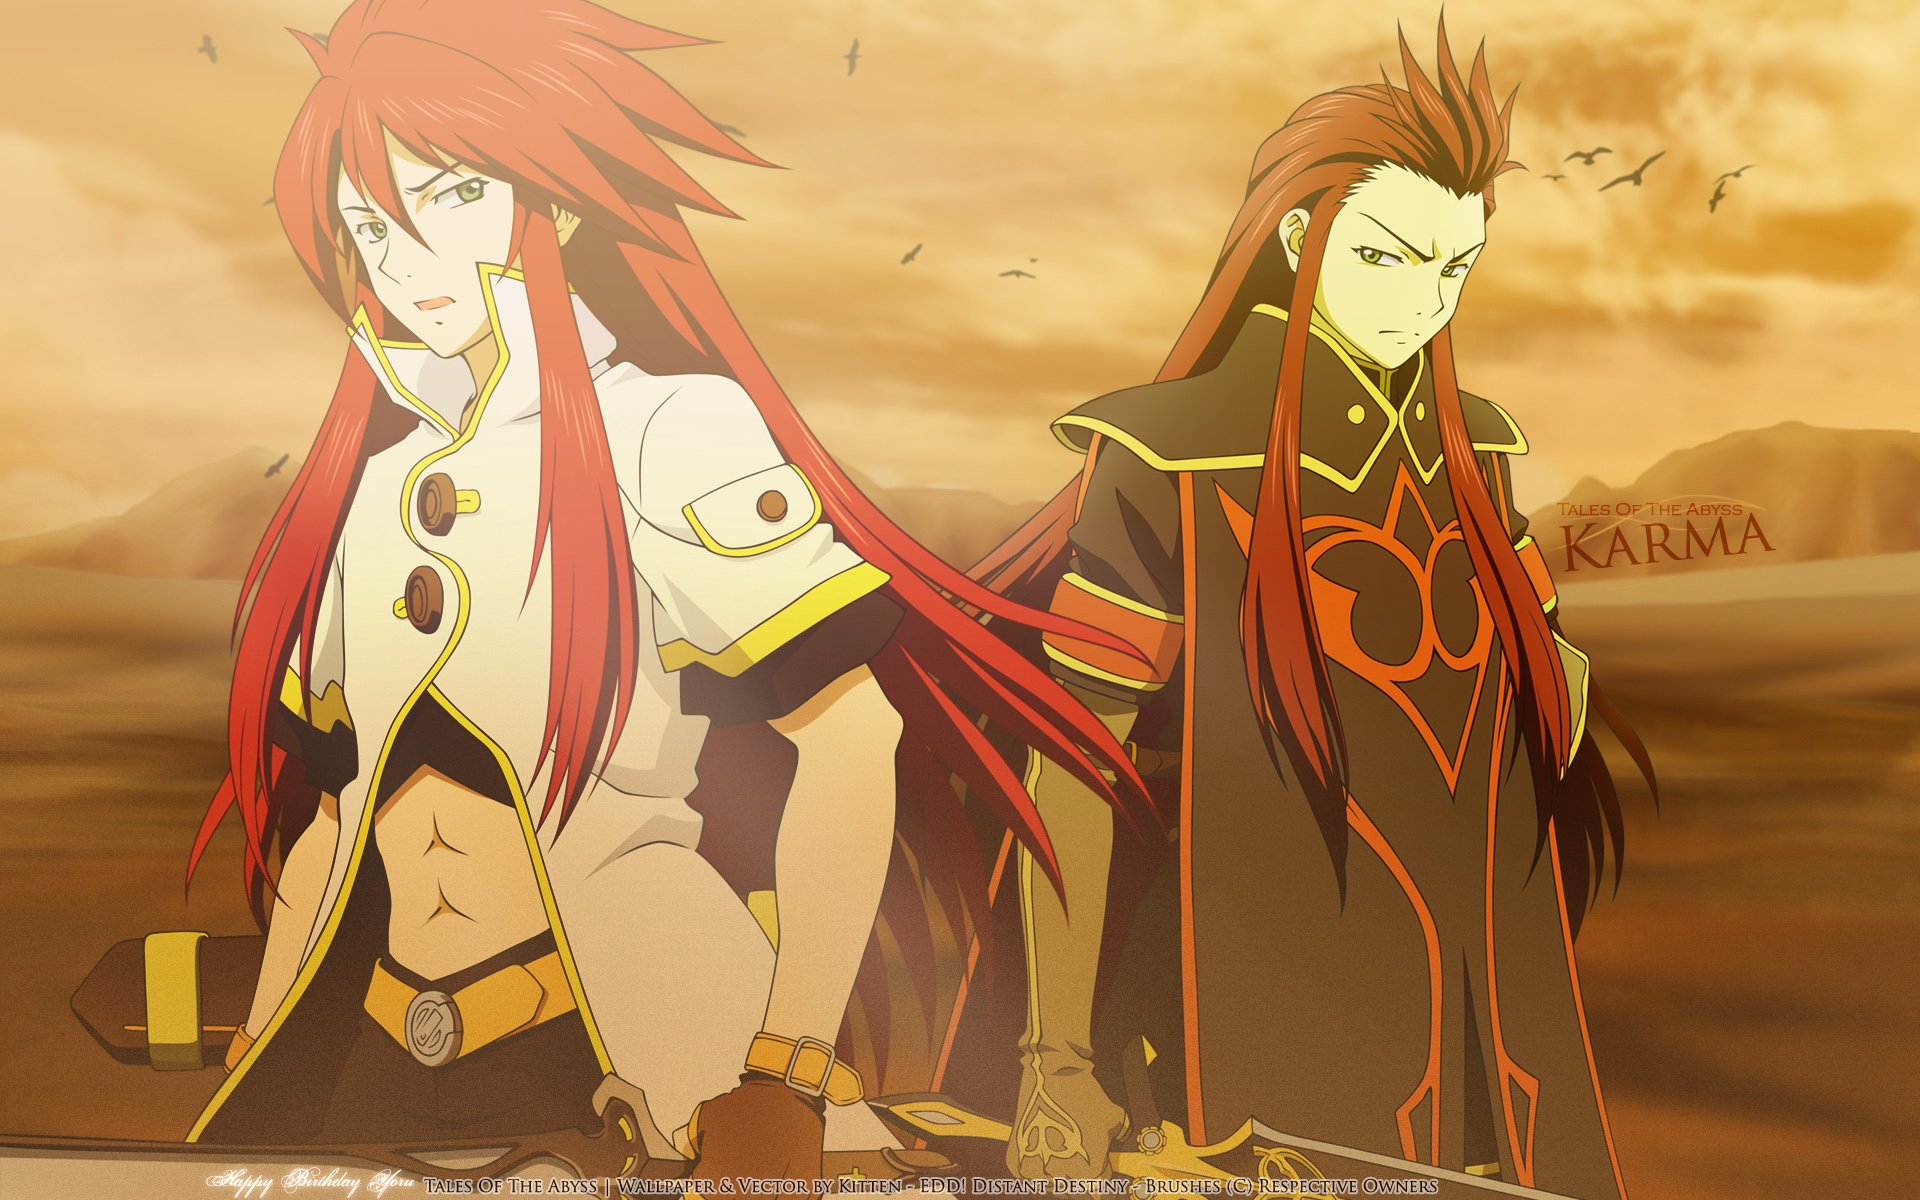 Tales of the Abyss Essentials Blu-ray | RightStuf